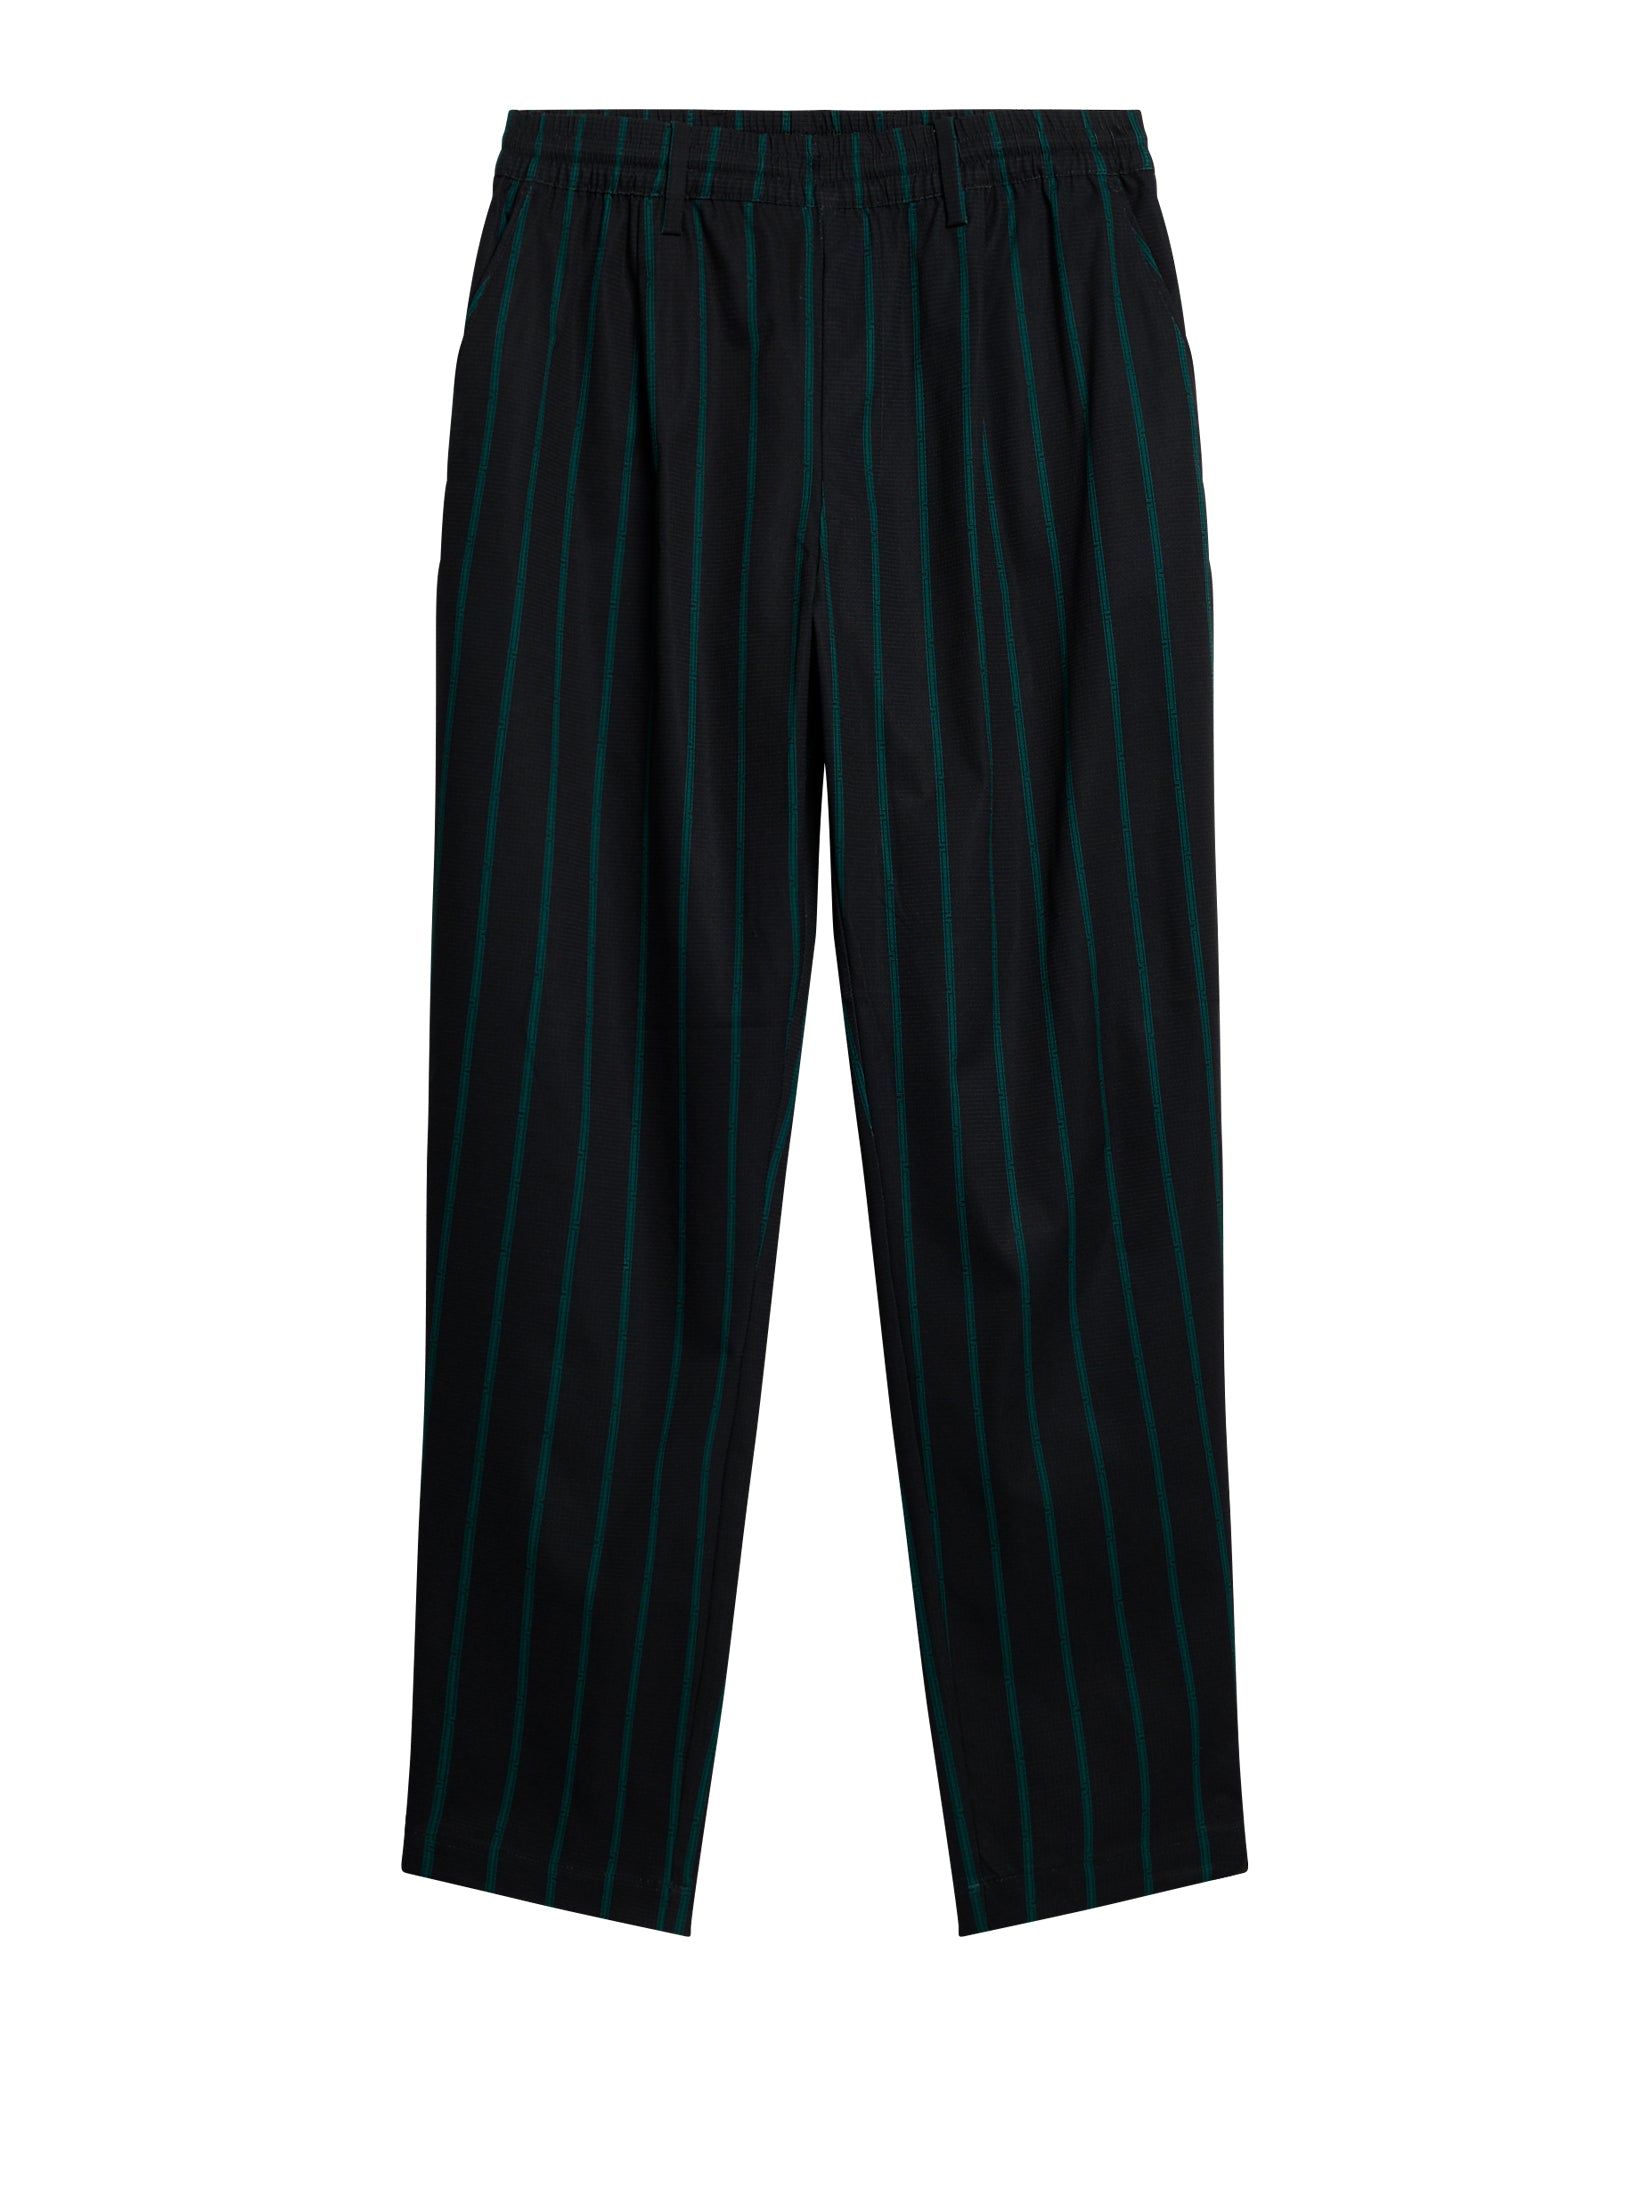 Stone Houndstooth Check Slim Fit Trousers | New Look